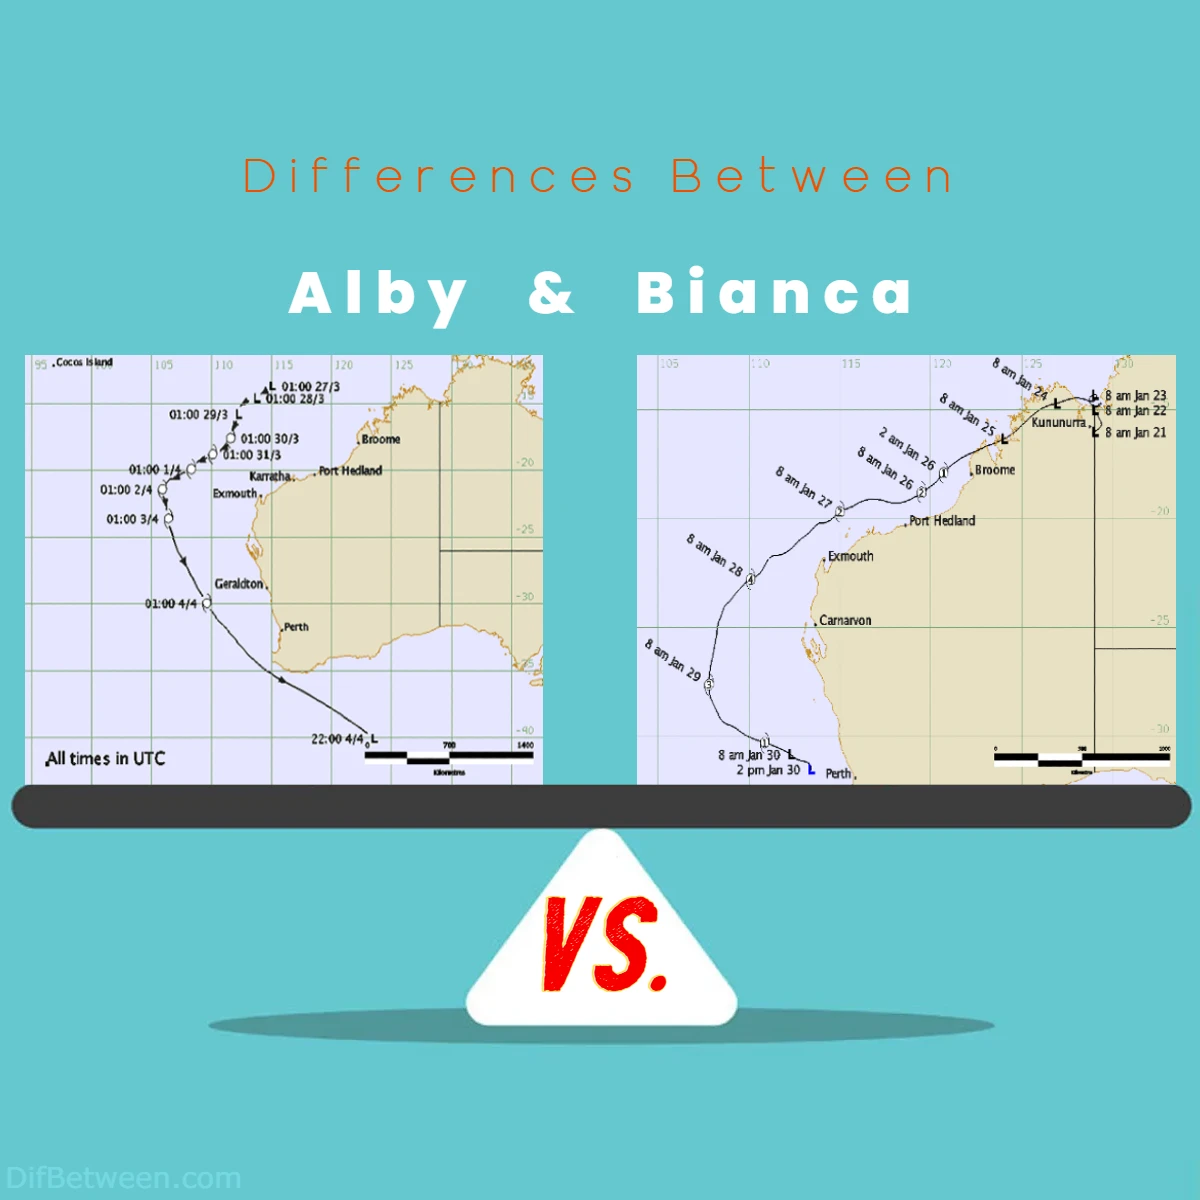 Differences Between Alby vs Bianca